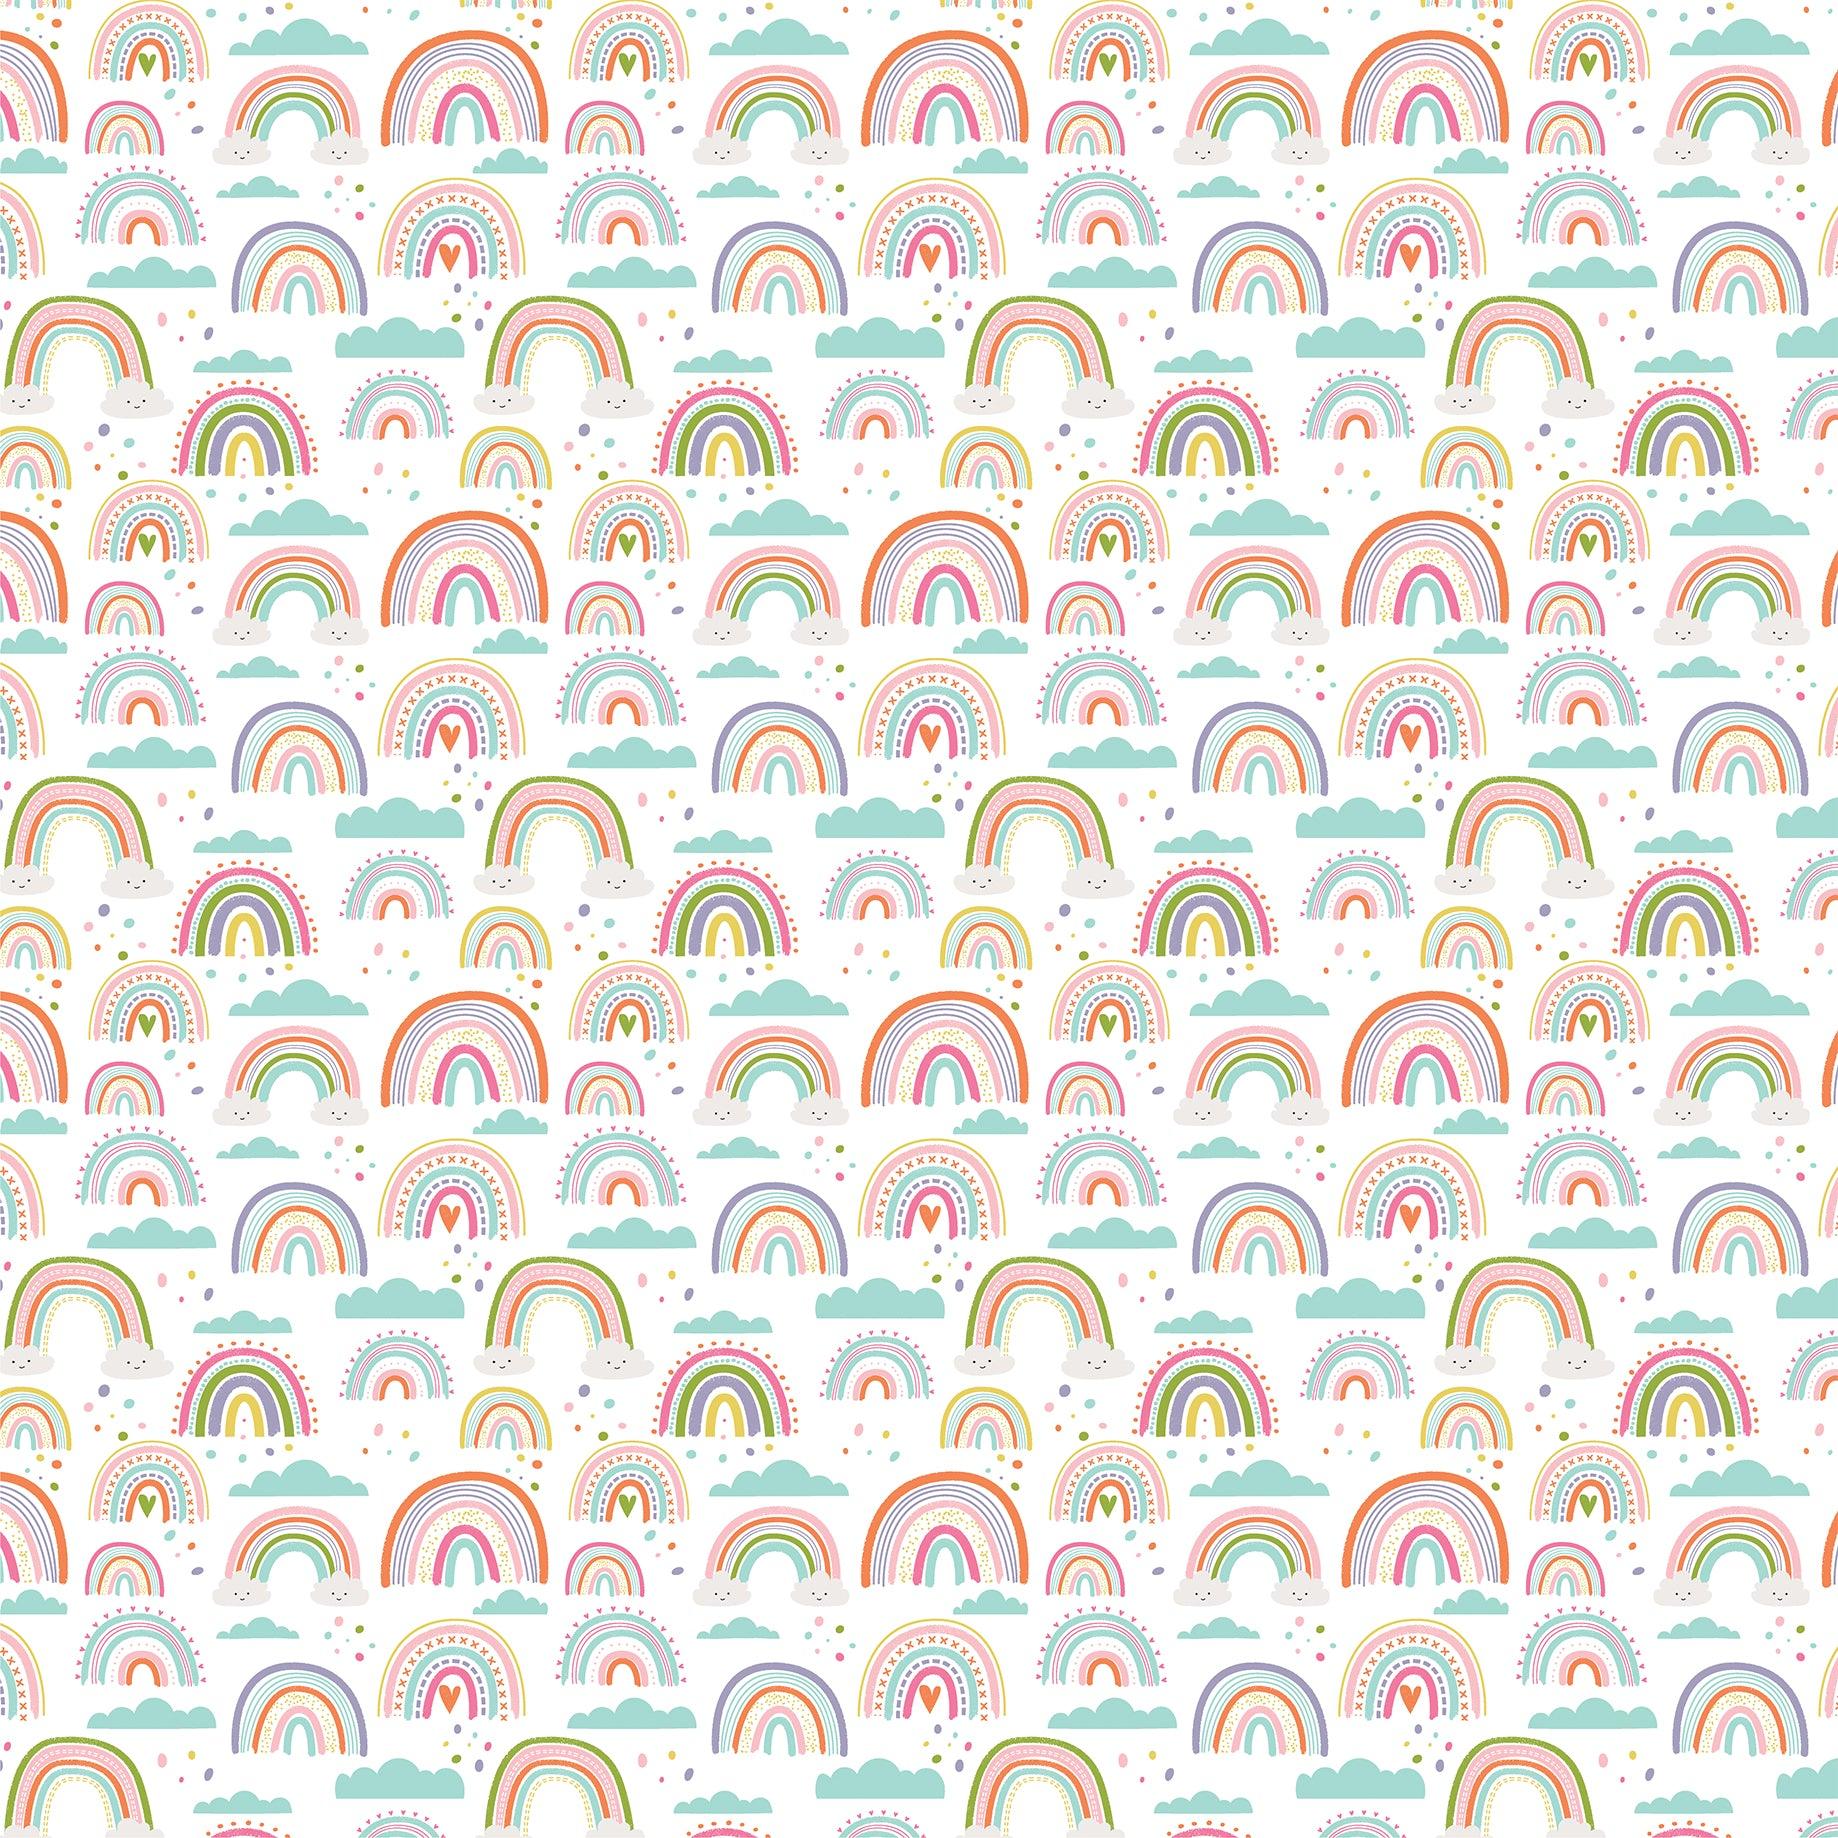 All About A Girl Collection Colorful Skies 12 x 12 Double-Sided Scrapbook Paper by Echo Park Paper - Scrapbook Supply Companies